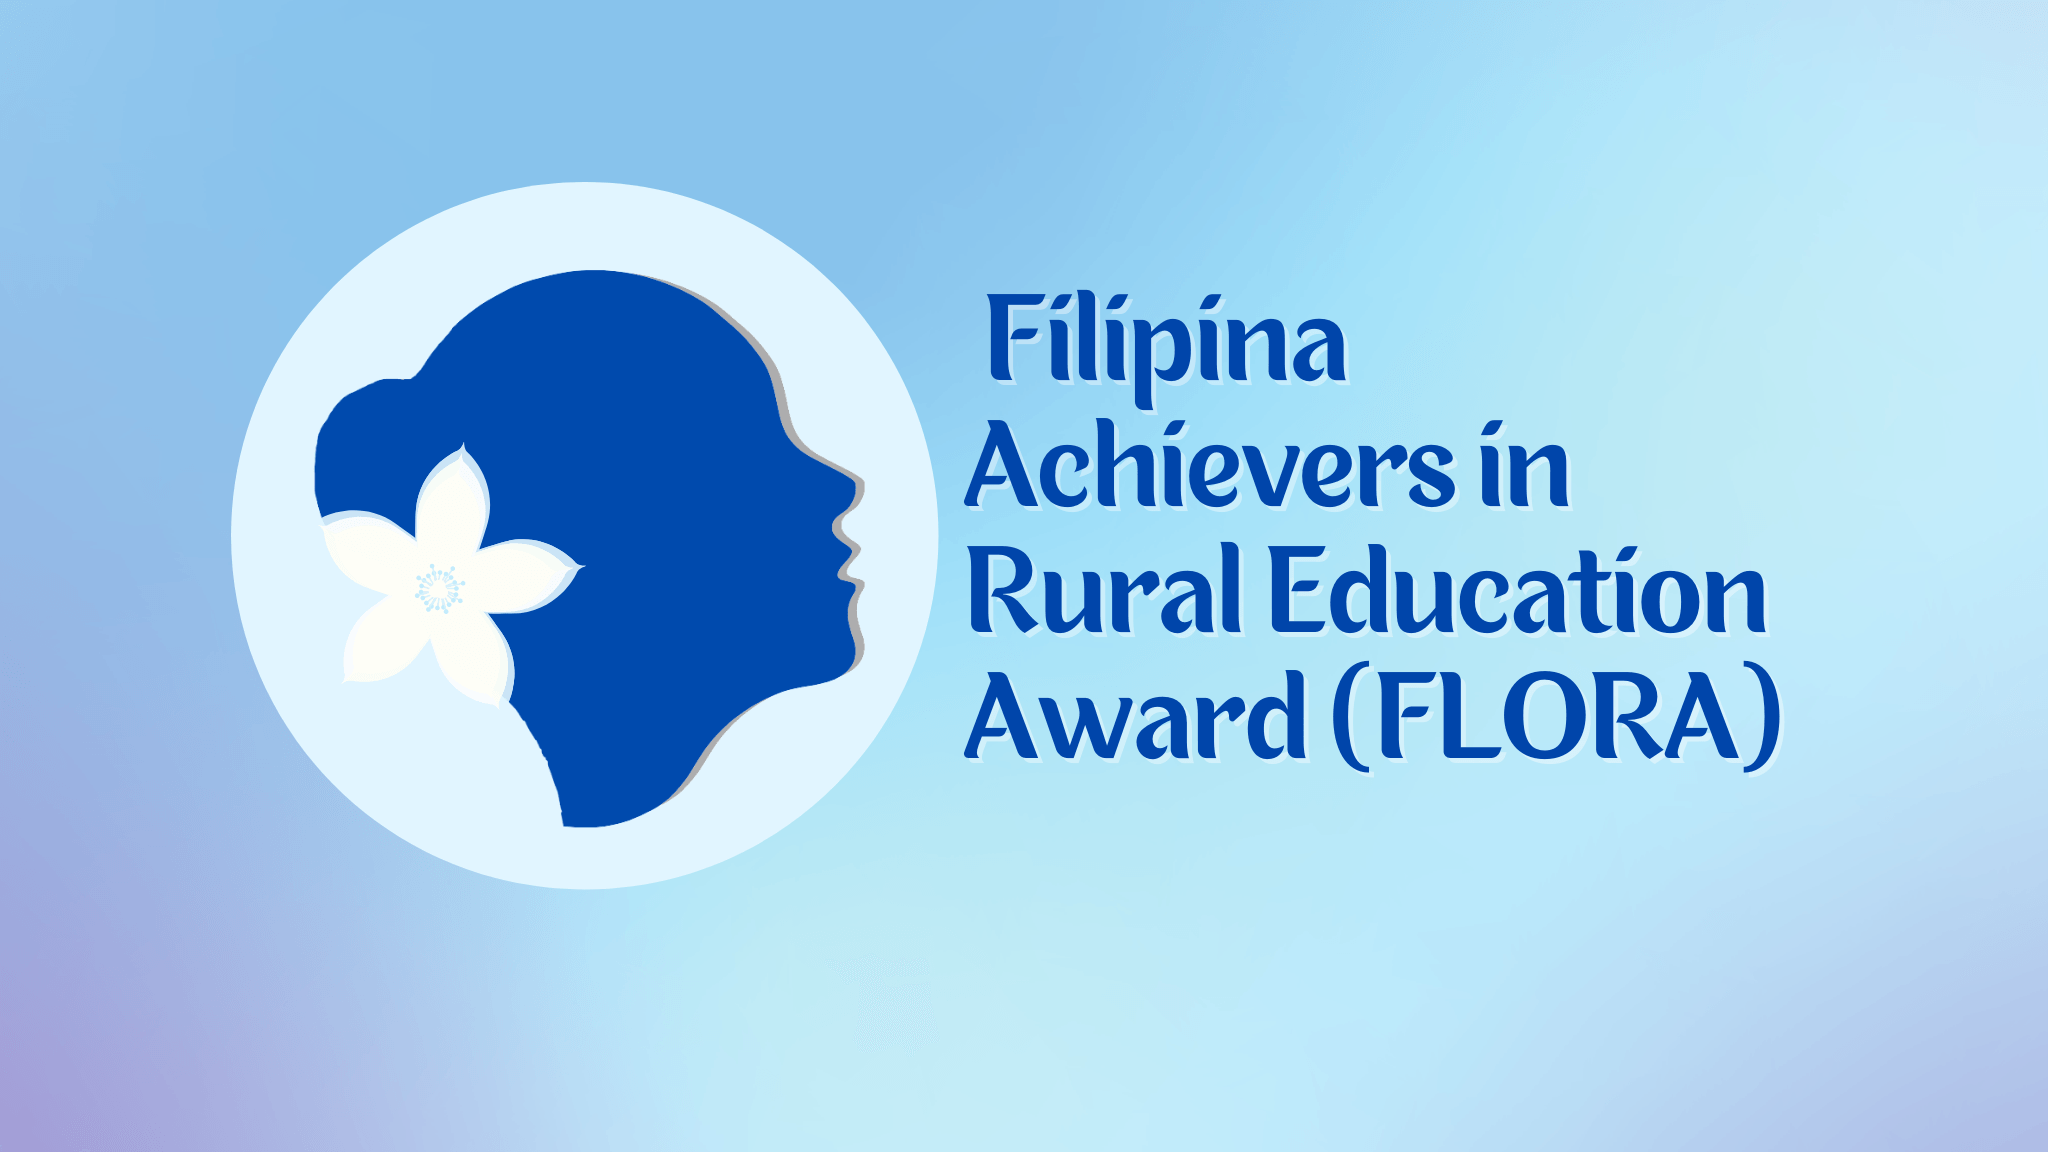 Awards for women in rural education launched